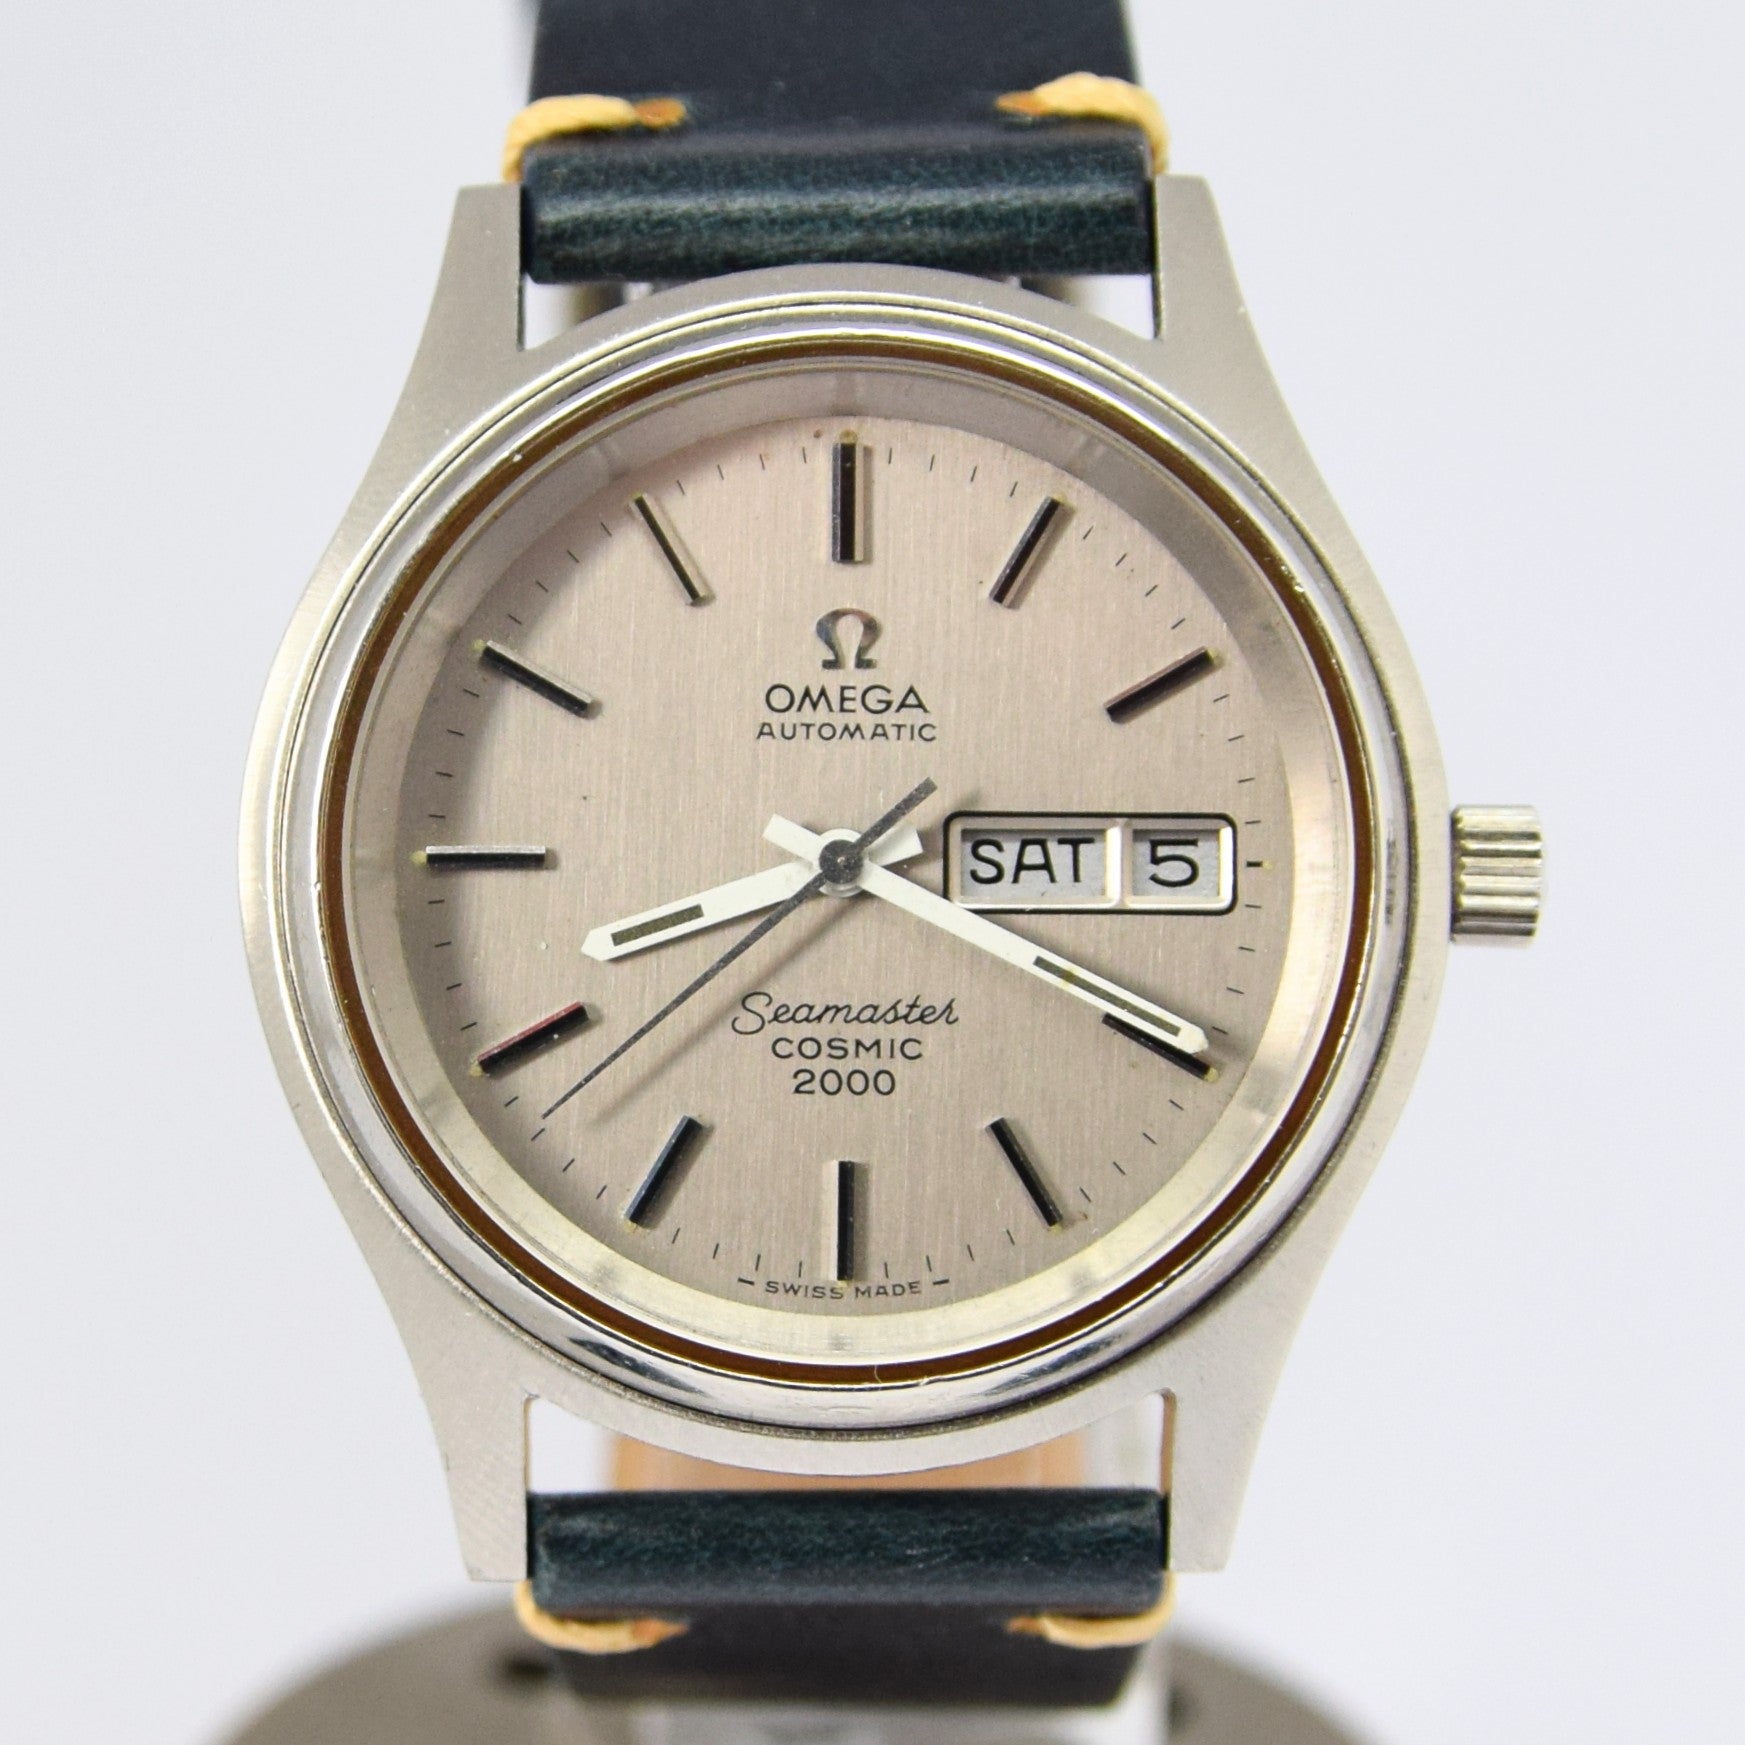 1972 Omega Large Cosmic 2000 Automatic Date Model 166.0129 | Antique ...